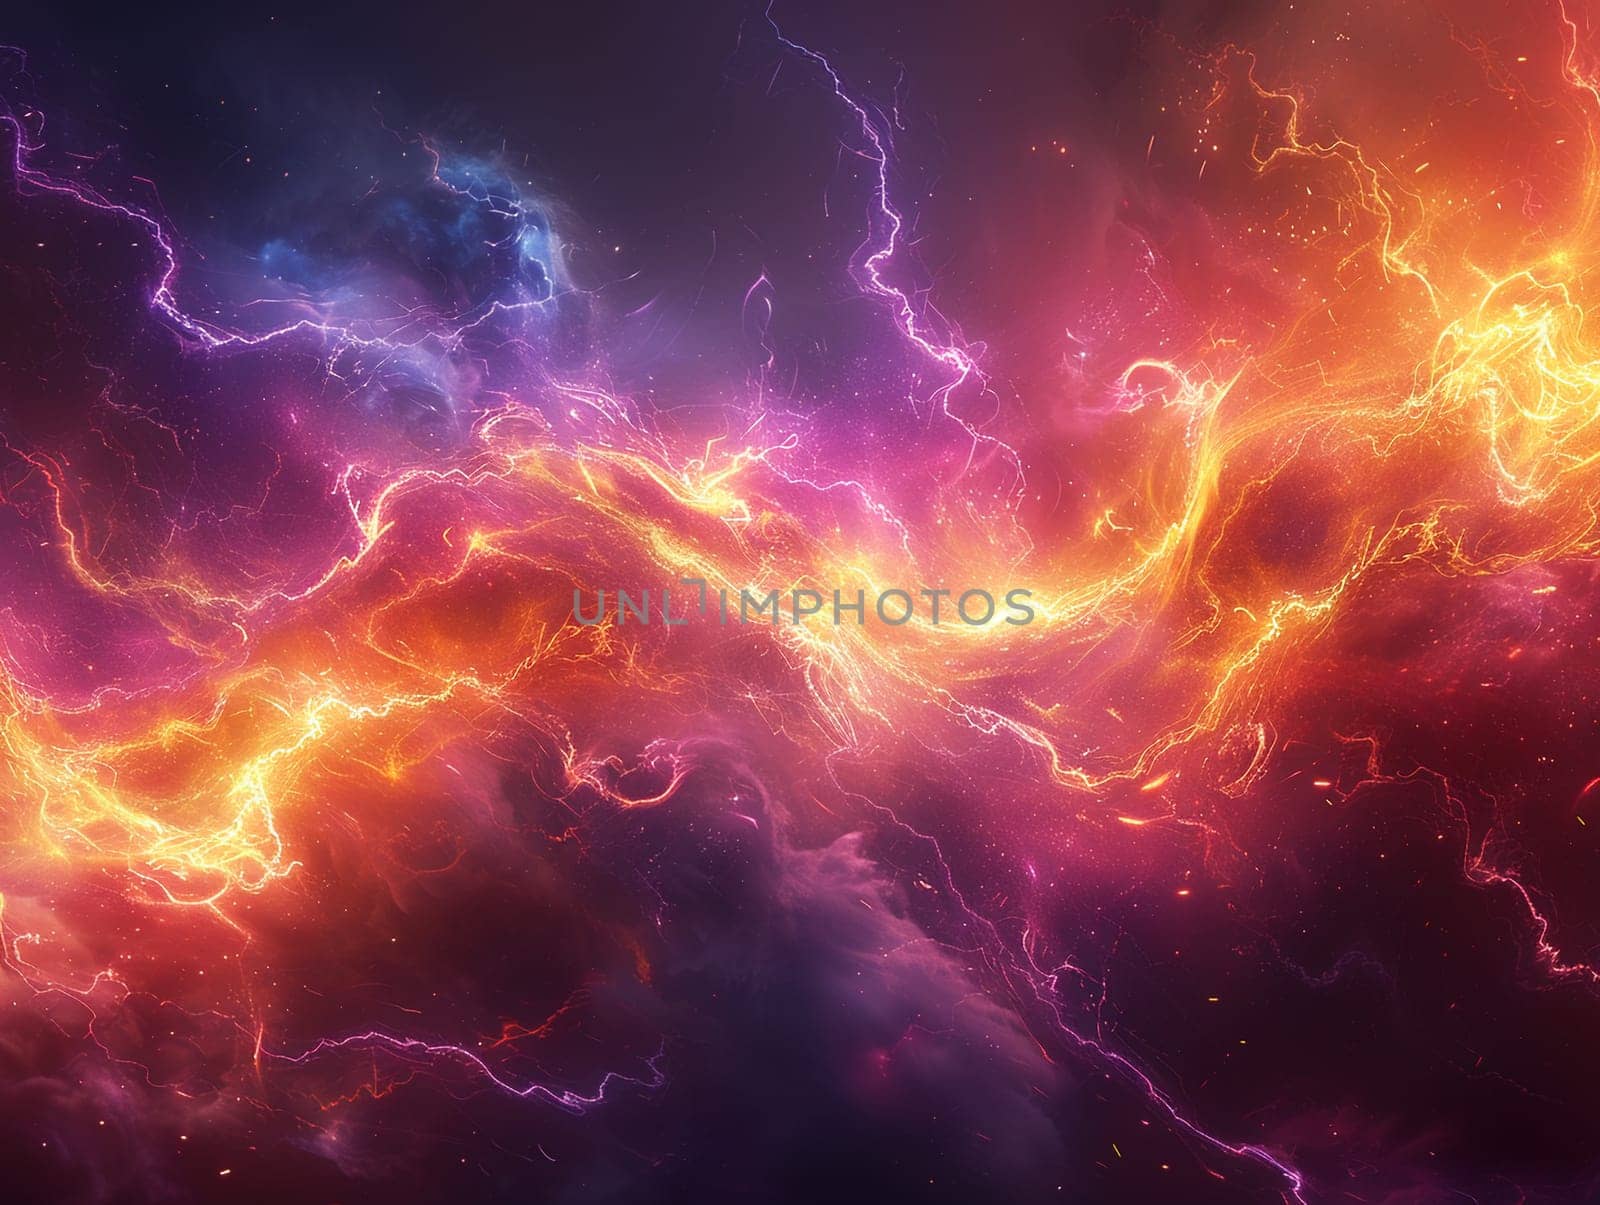 Electricity-themed abstract digital art, showcasing vibrant lightning strikes and energy flows.